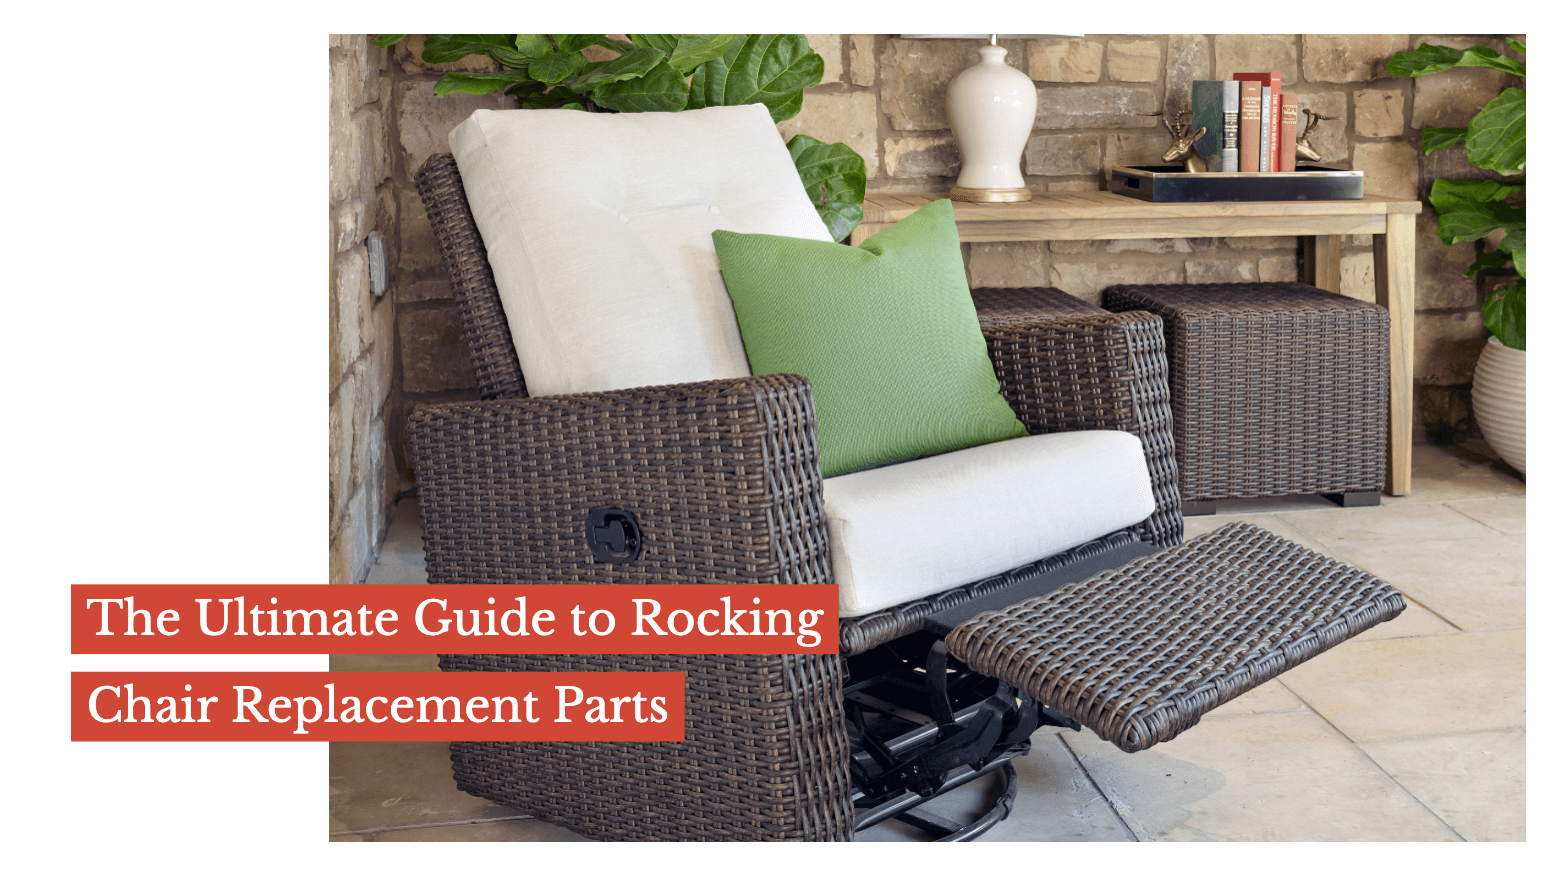 The Ultimate Guide to Rocking Chair Replacement Parts – Sunniland Patio